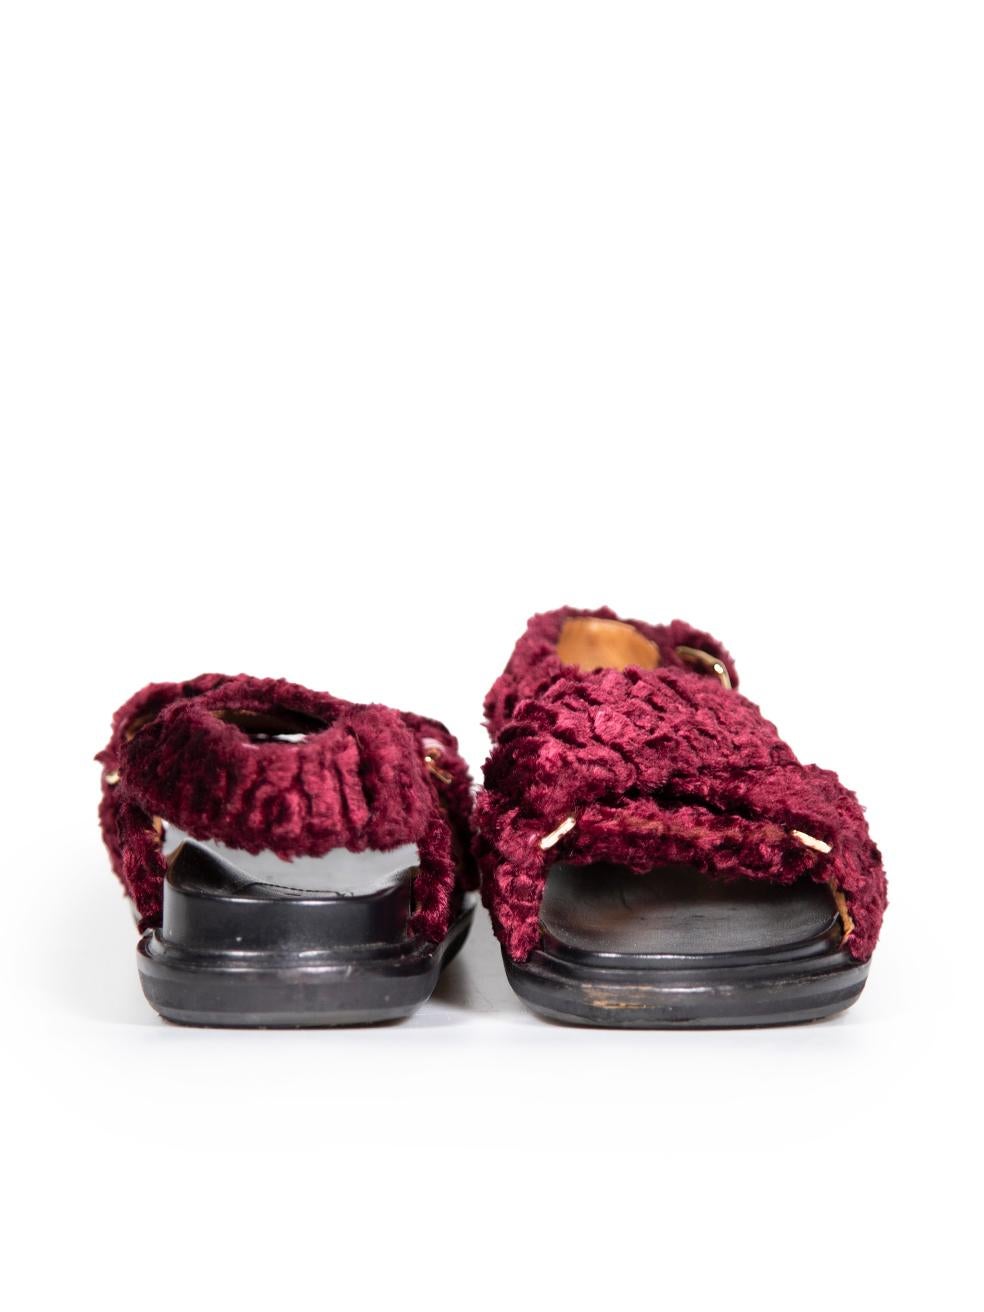 Marni Burgundy Faux Shearling Fussbett Strap Sandals Size IT 38 In Good Condition For Sale In London, GB